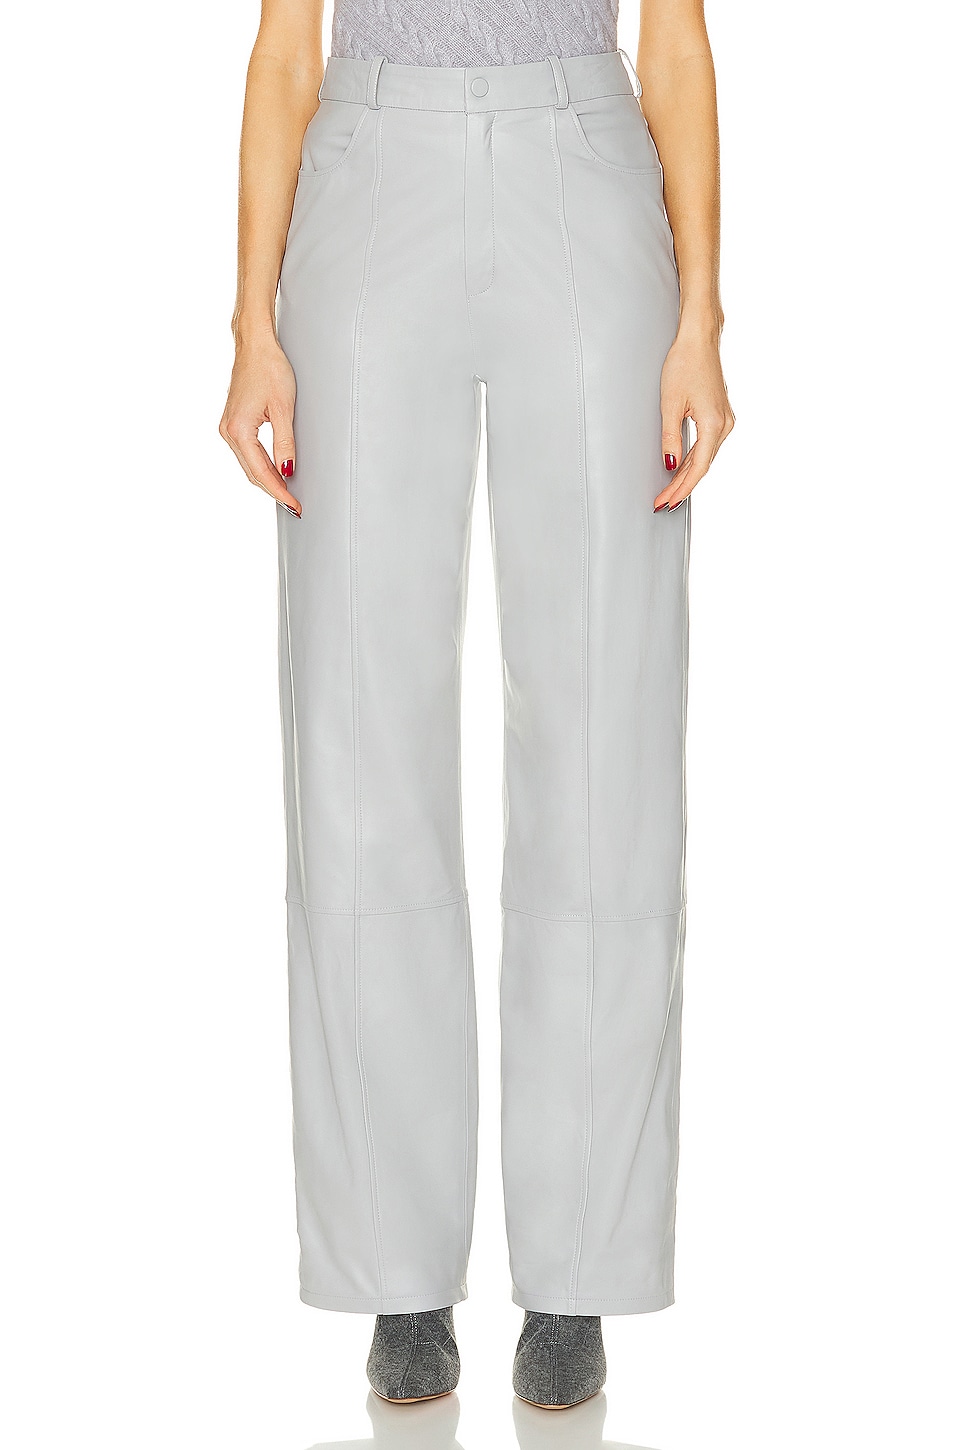 Image 1 of Zeynep Arcay High Waisted Loose Leather Pants in Grey Silence